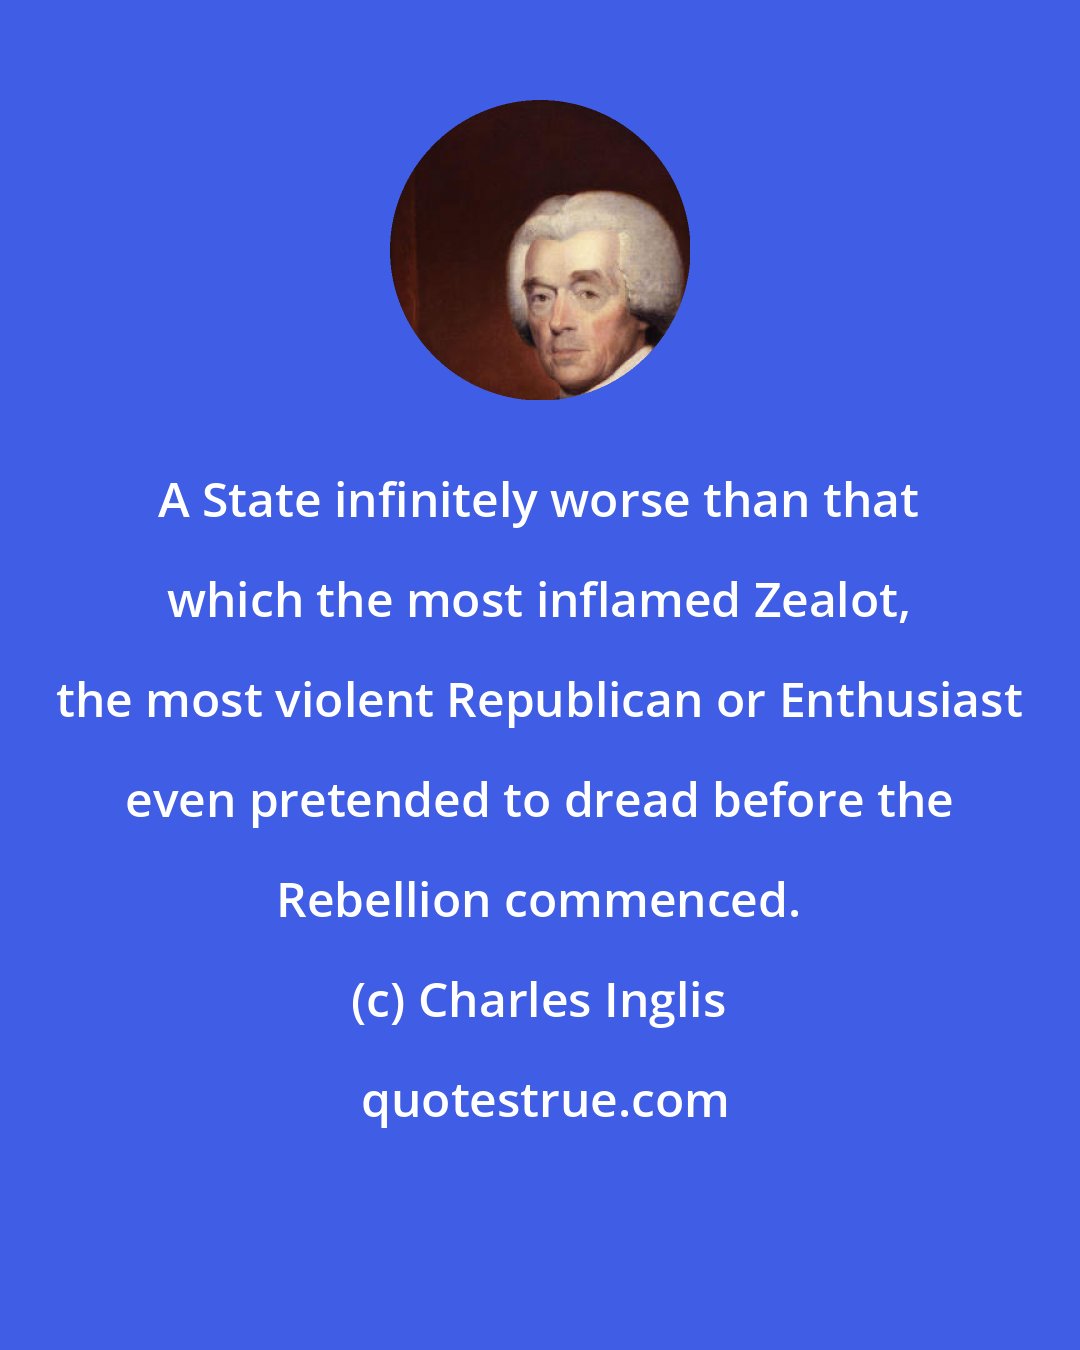 Charles Inglis: A State infinitely worse than that which the most inflamed Zealot, the most violent Republican or Enthusiast even pretended to dread before the Rebellion commenced.